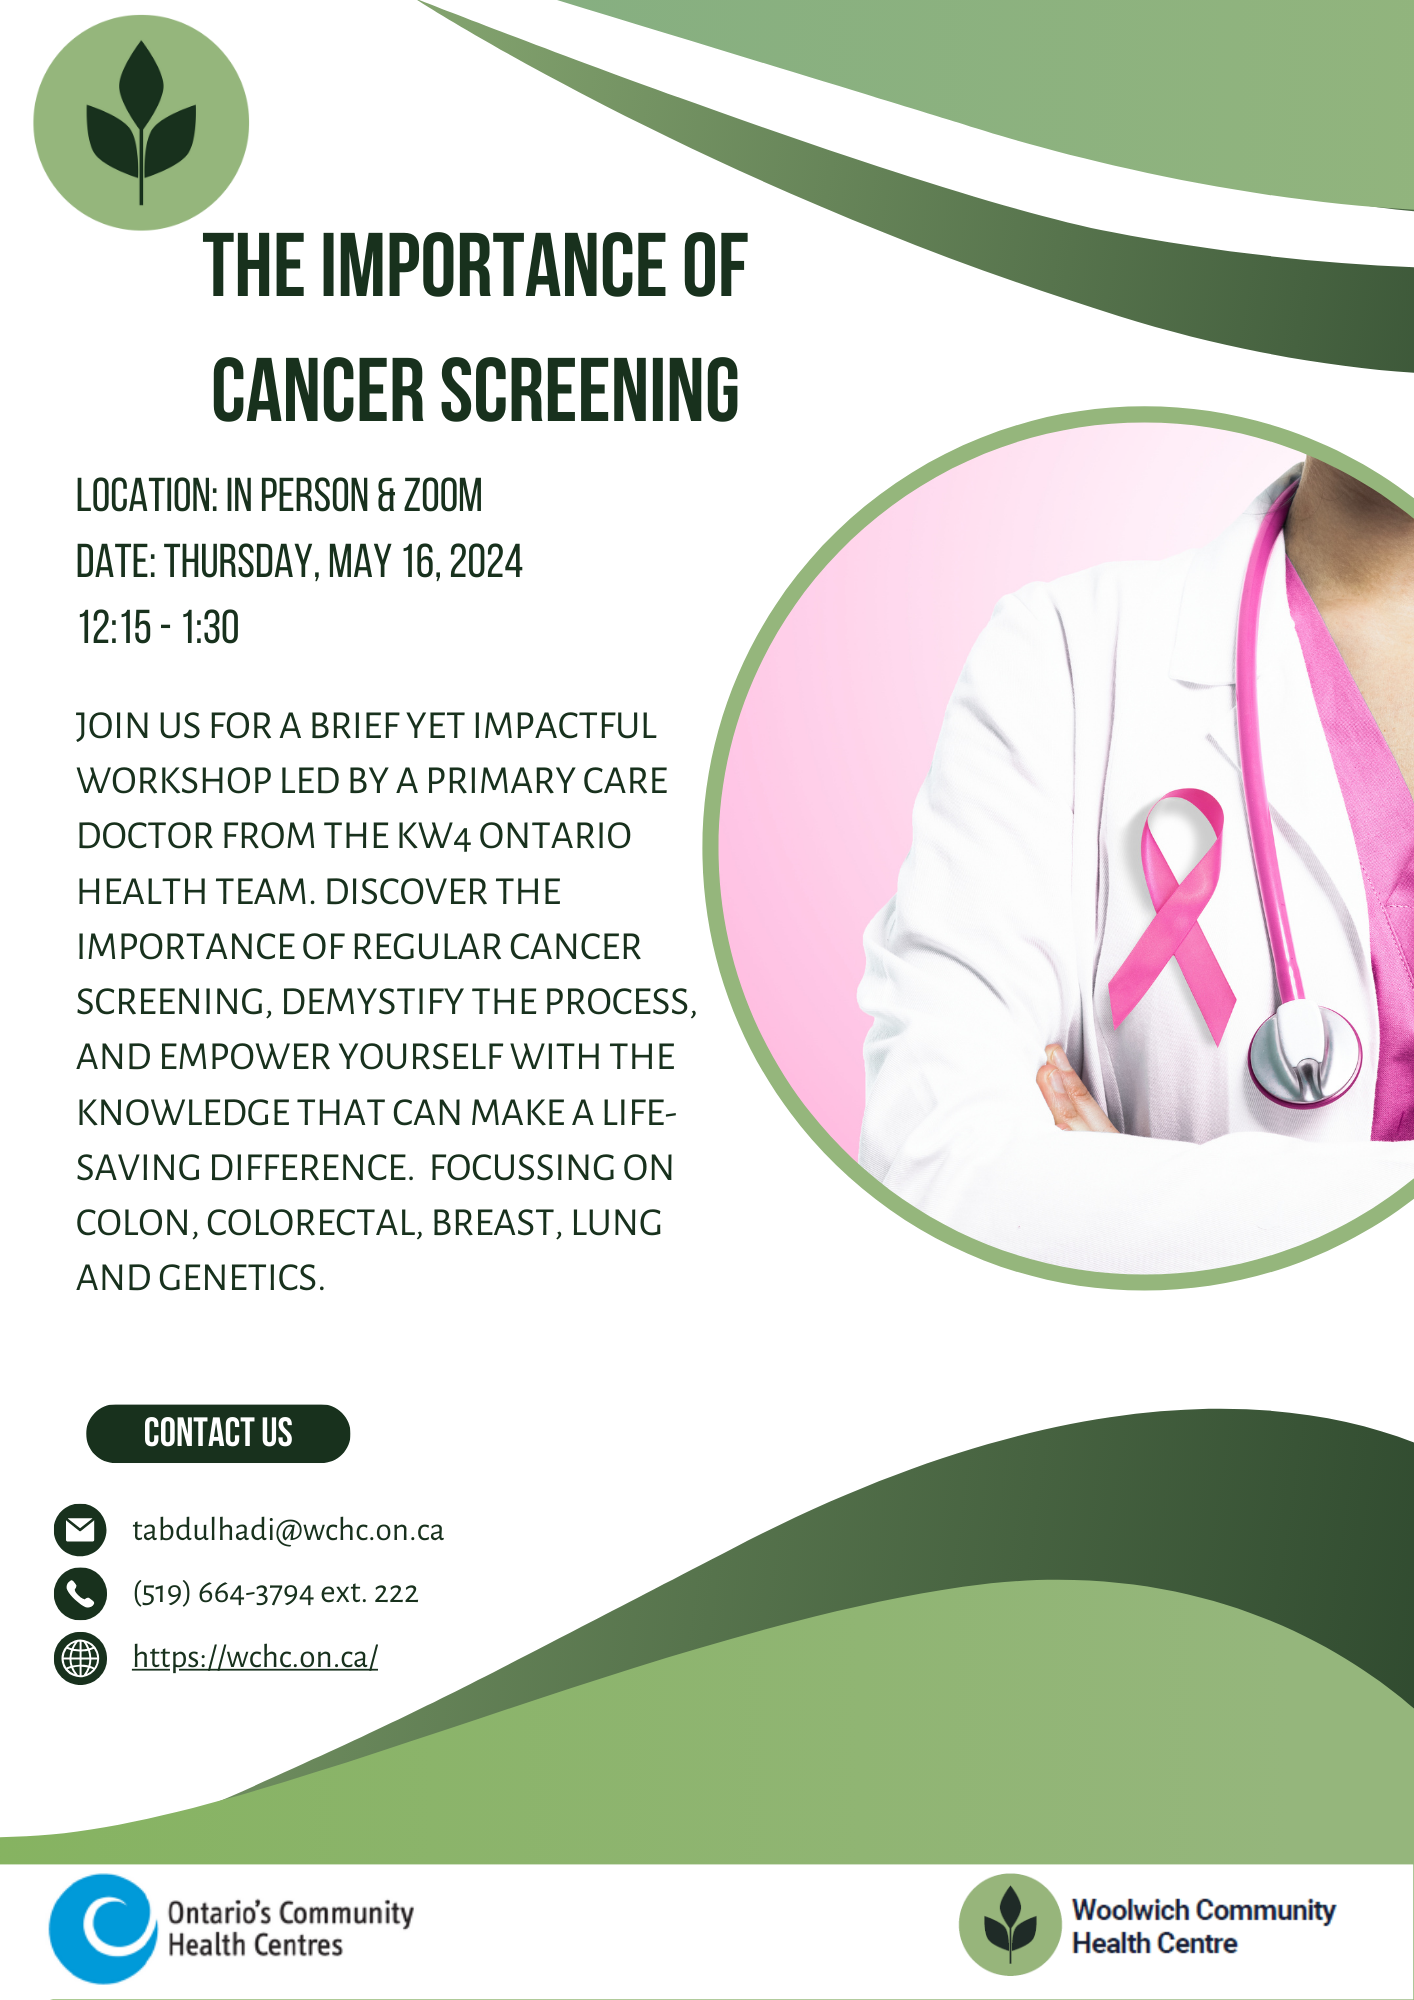 The Importance of Cancer Screening